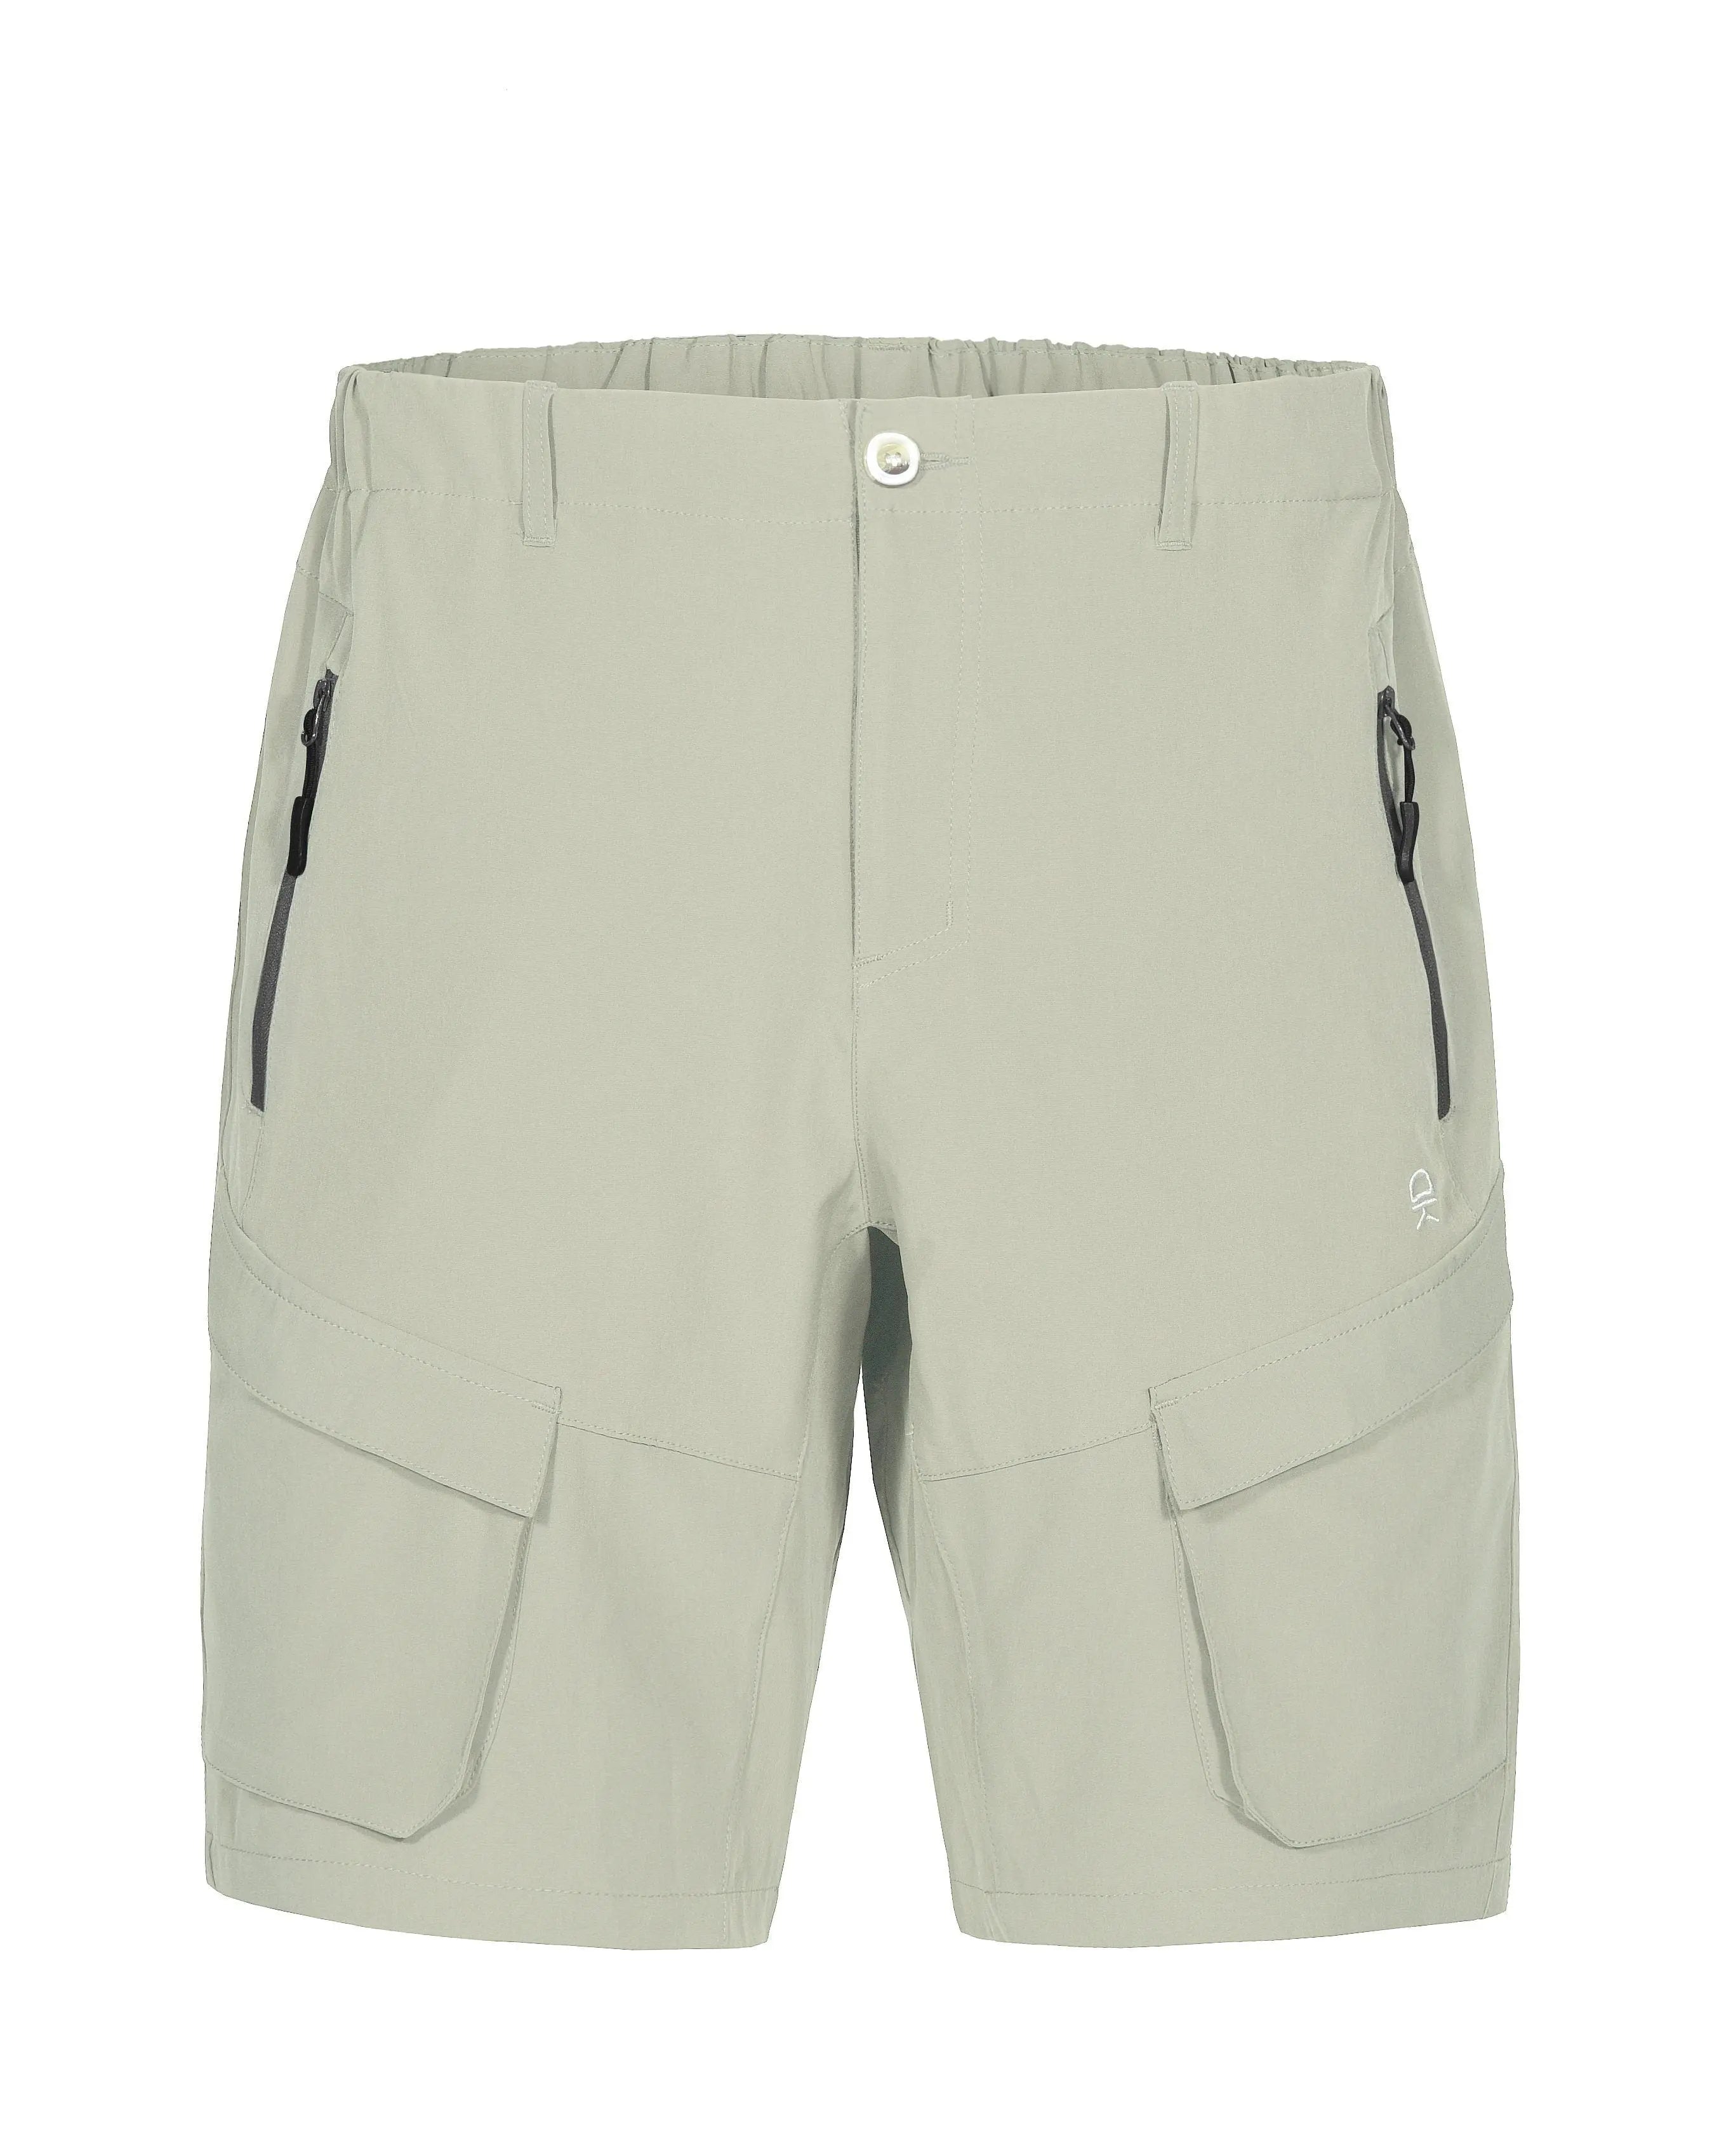 Men's Stretch Quick Dry Cargo Shorts for Hiking, Camping, Travel YZF US-DK